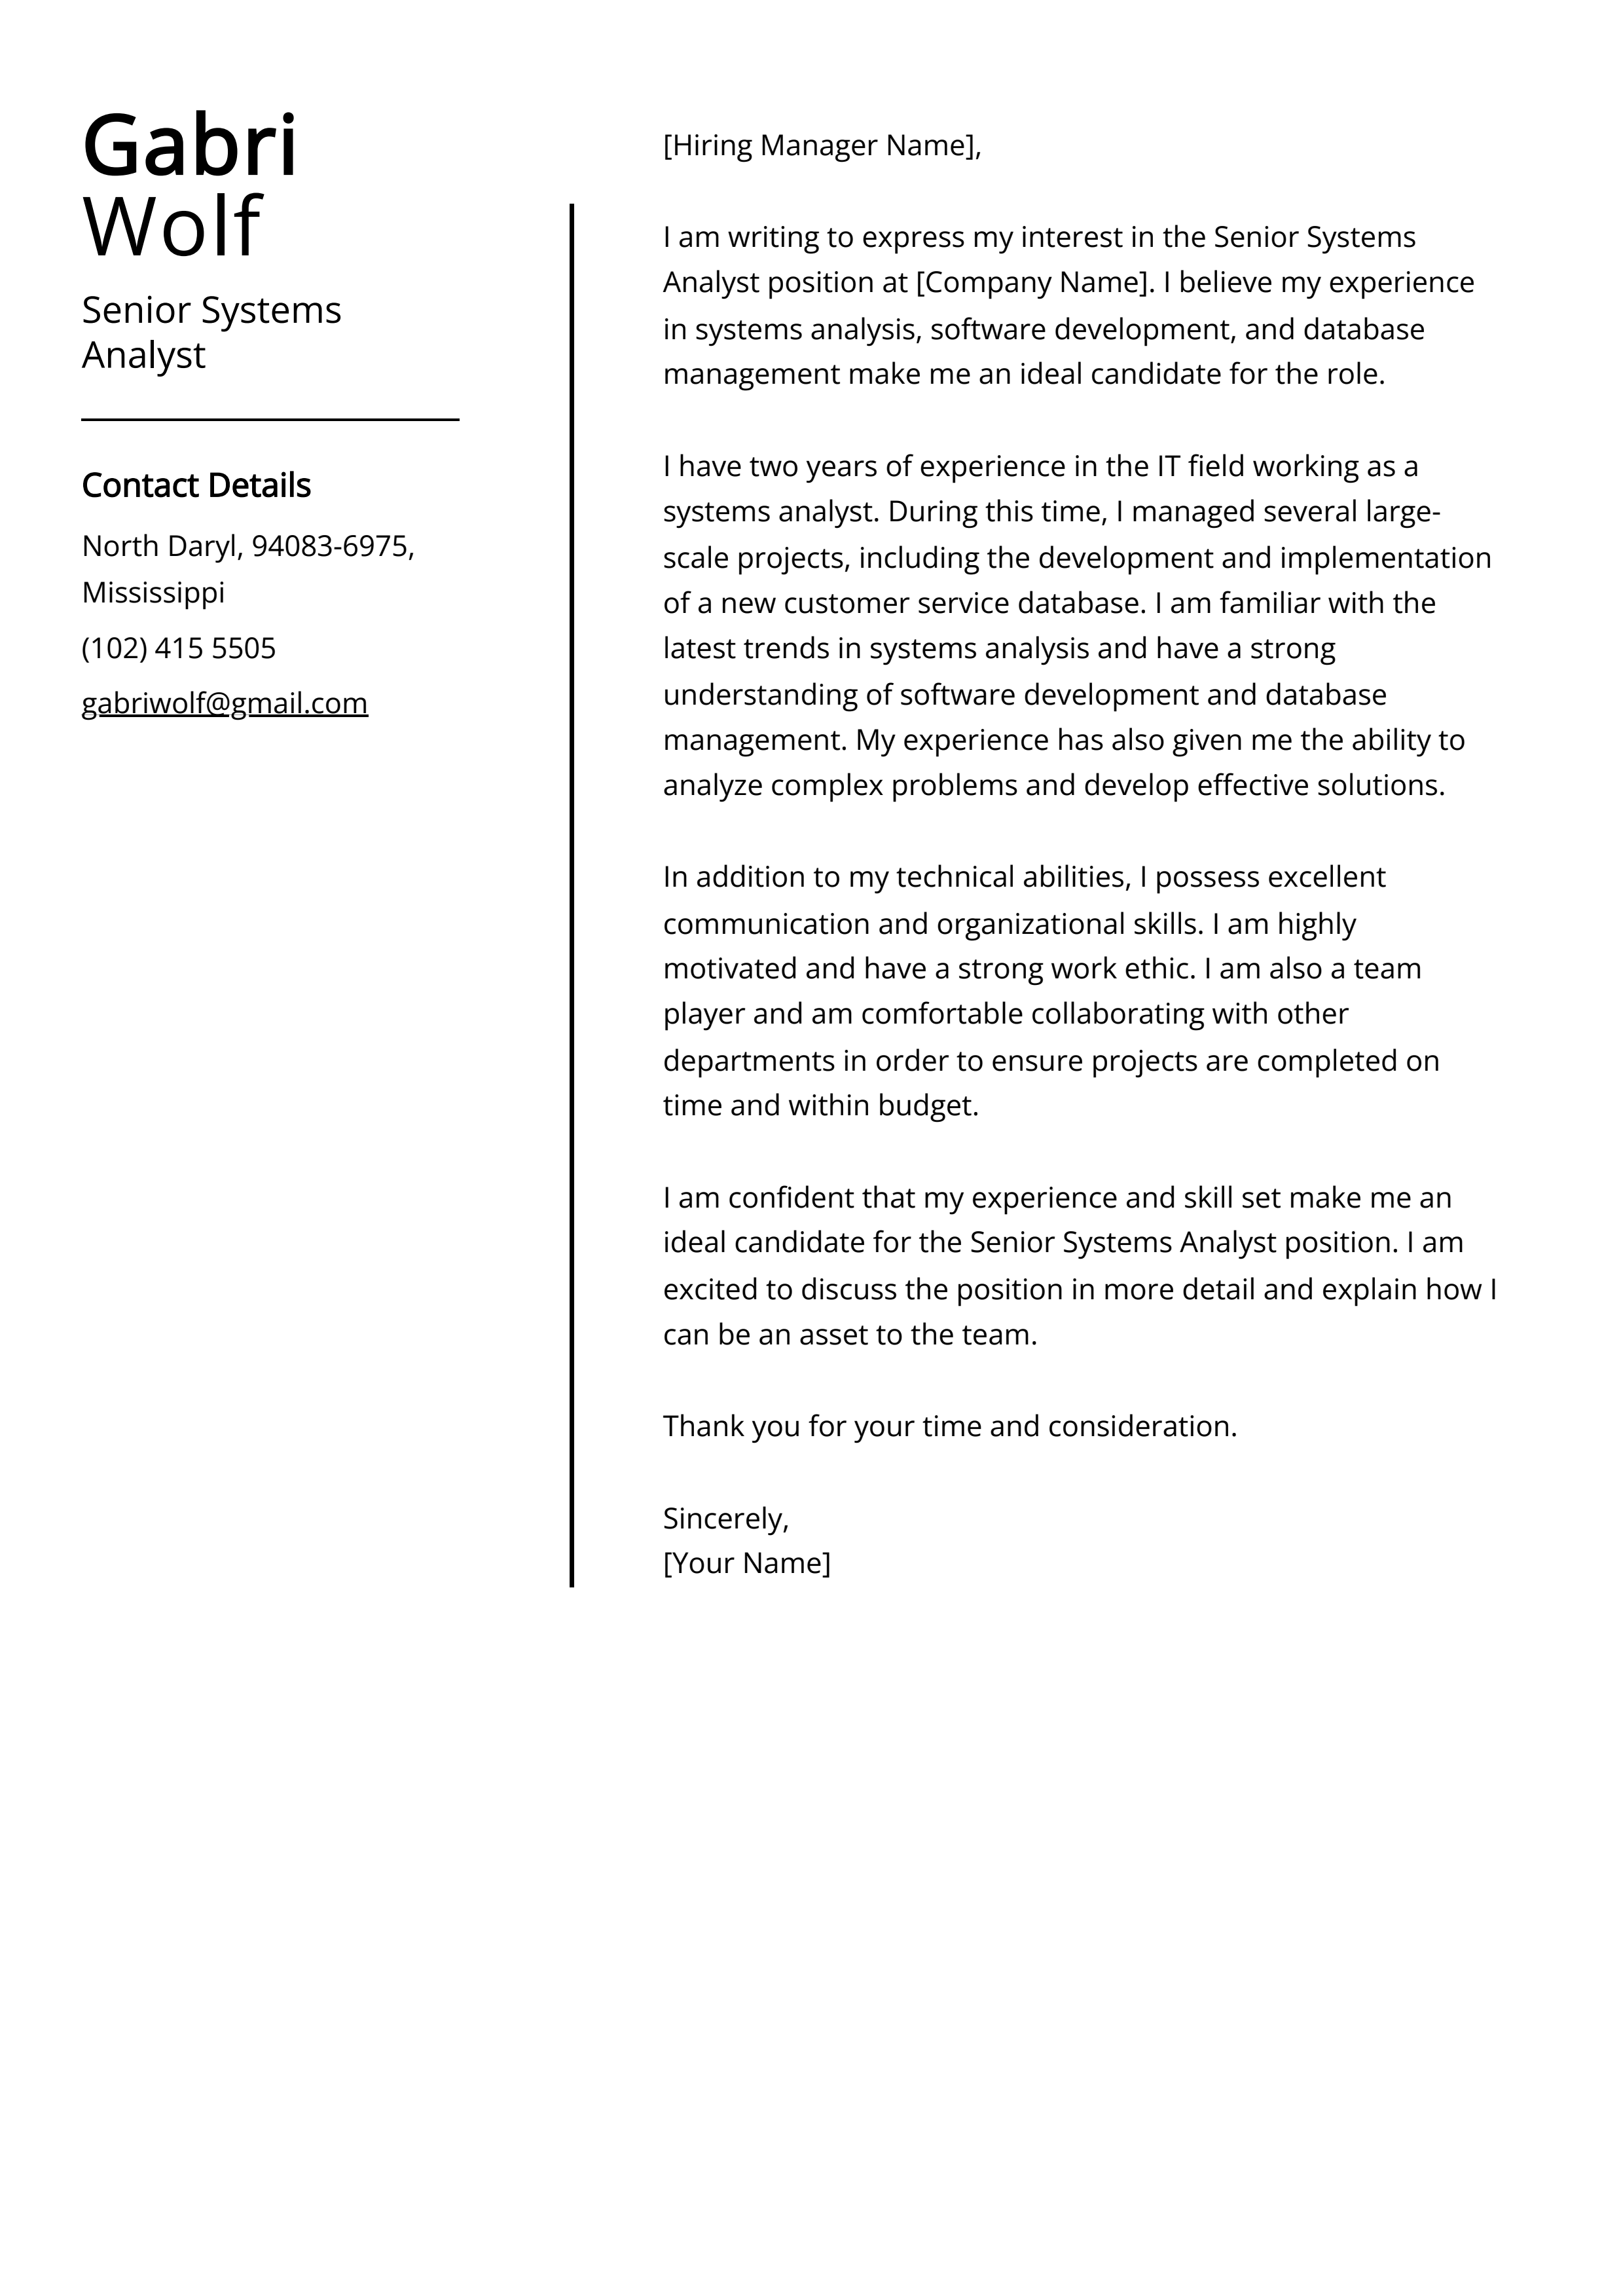 Senior Systems Analyst Cover Letter Example